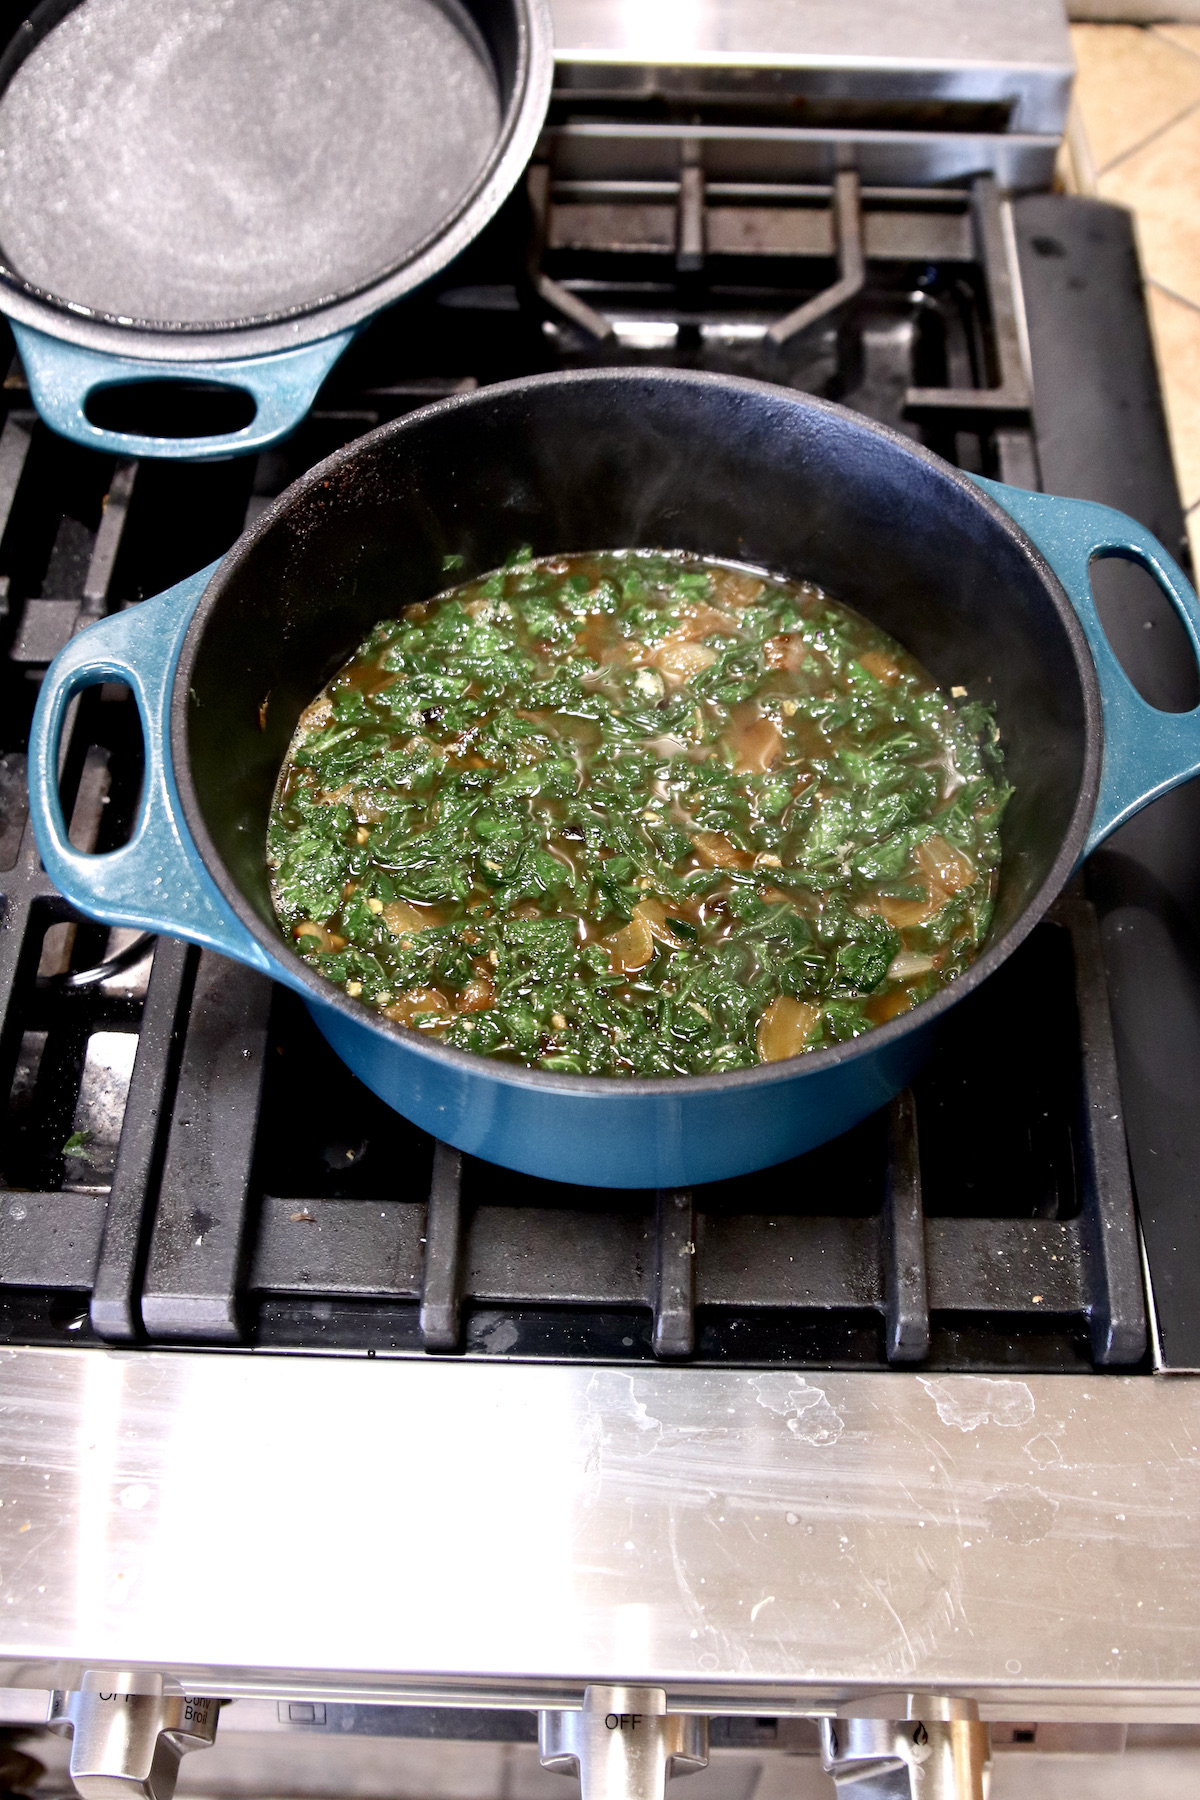 cooking turnip greens in a dutch oven